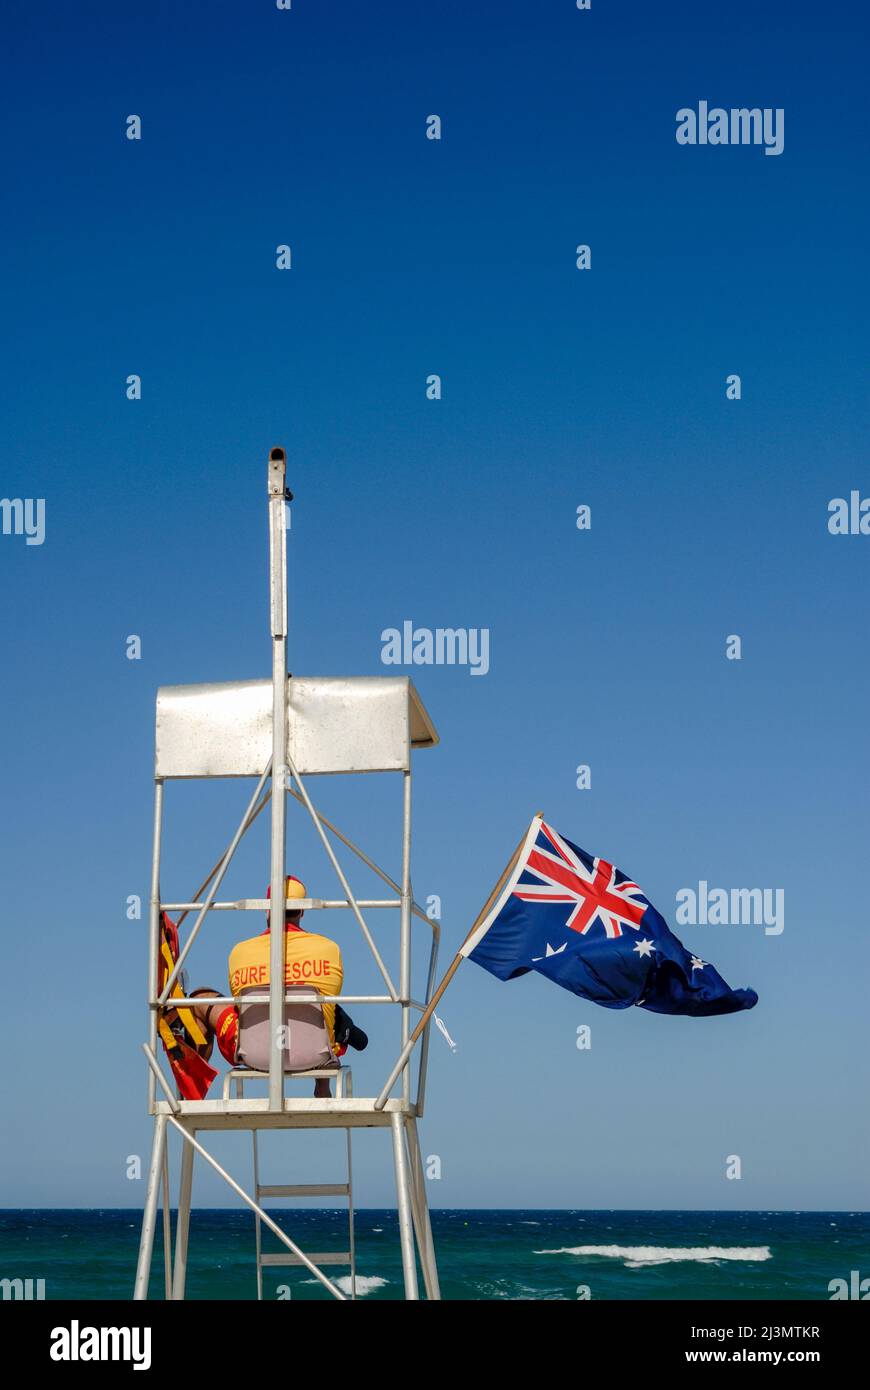 Surf lifesaver overseeing beach, watching for danger and people in distress. Stock Photo